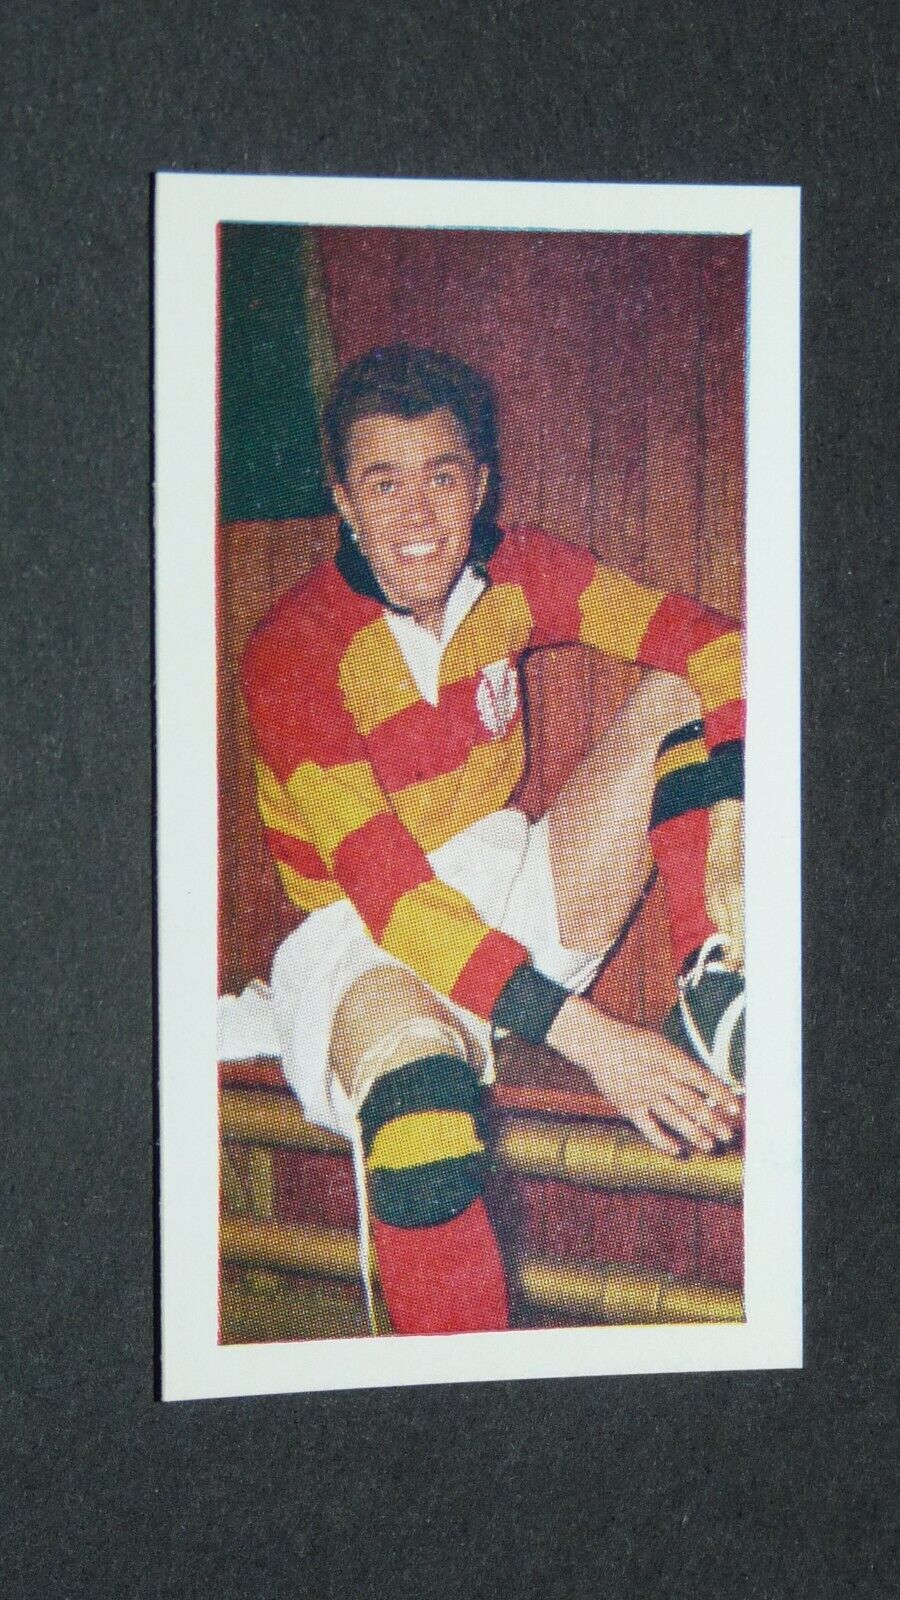 1960 FOOTBALL DICKSON ORDER CARD #4 GEORGE SMITH PARTICK THISTLE SCOTLAND JAGS